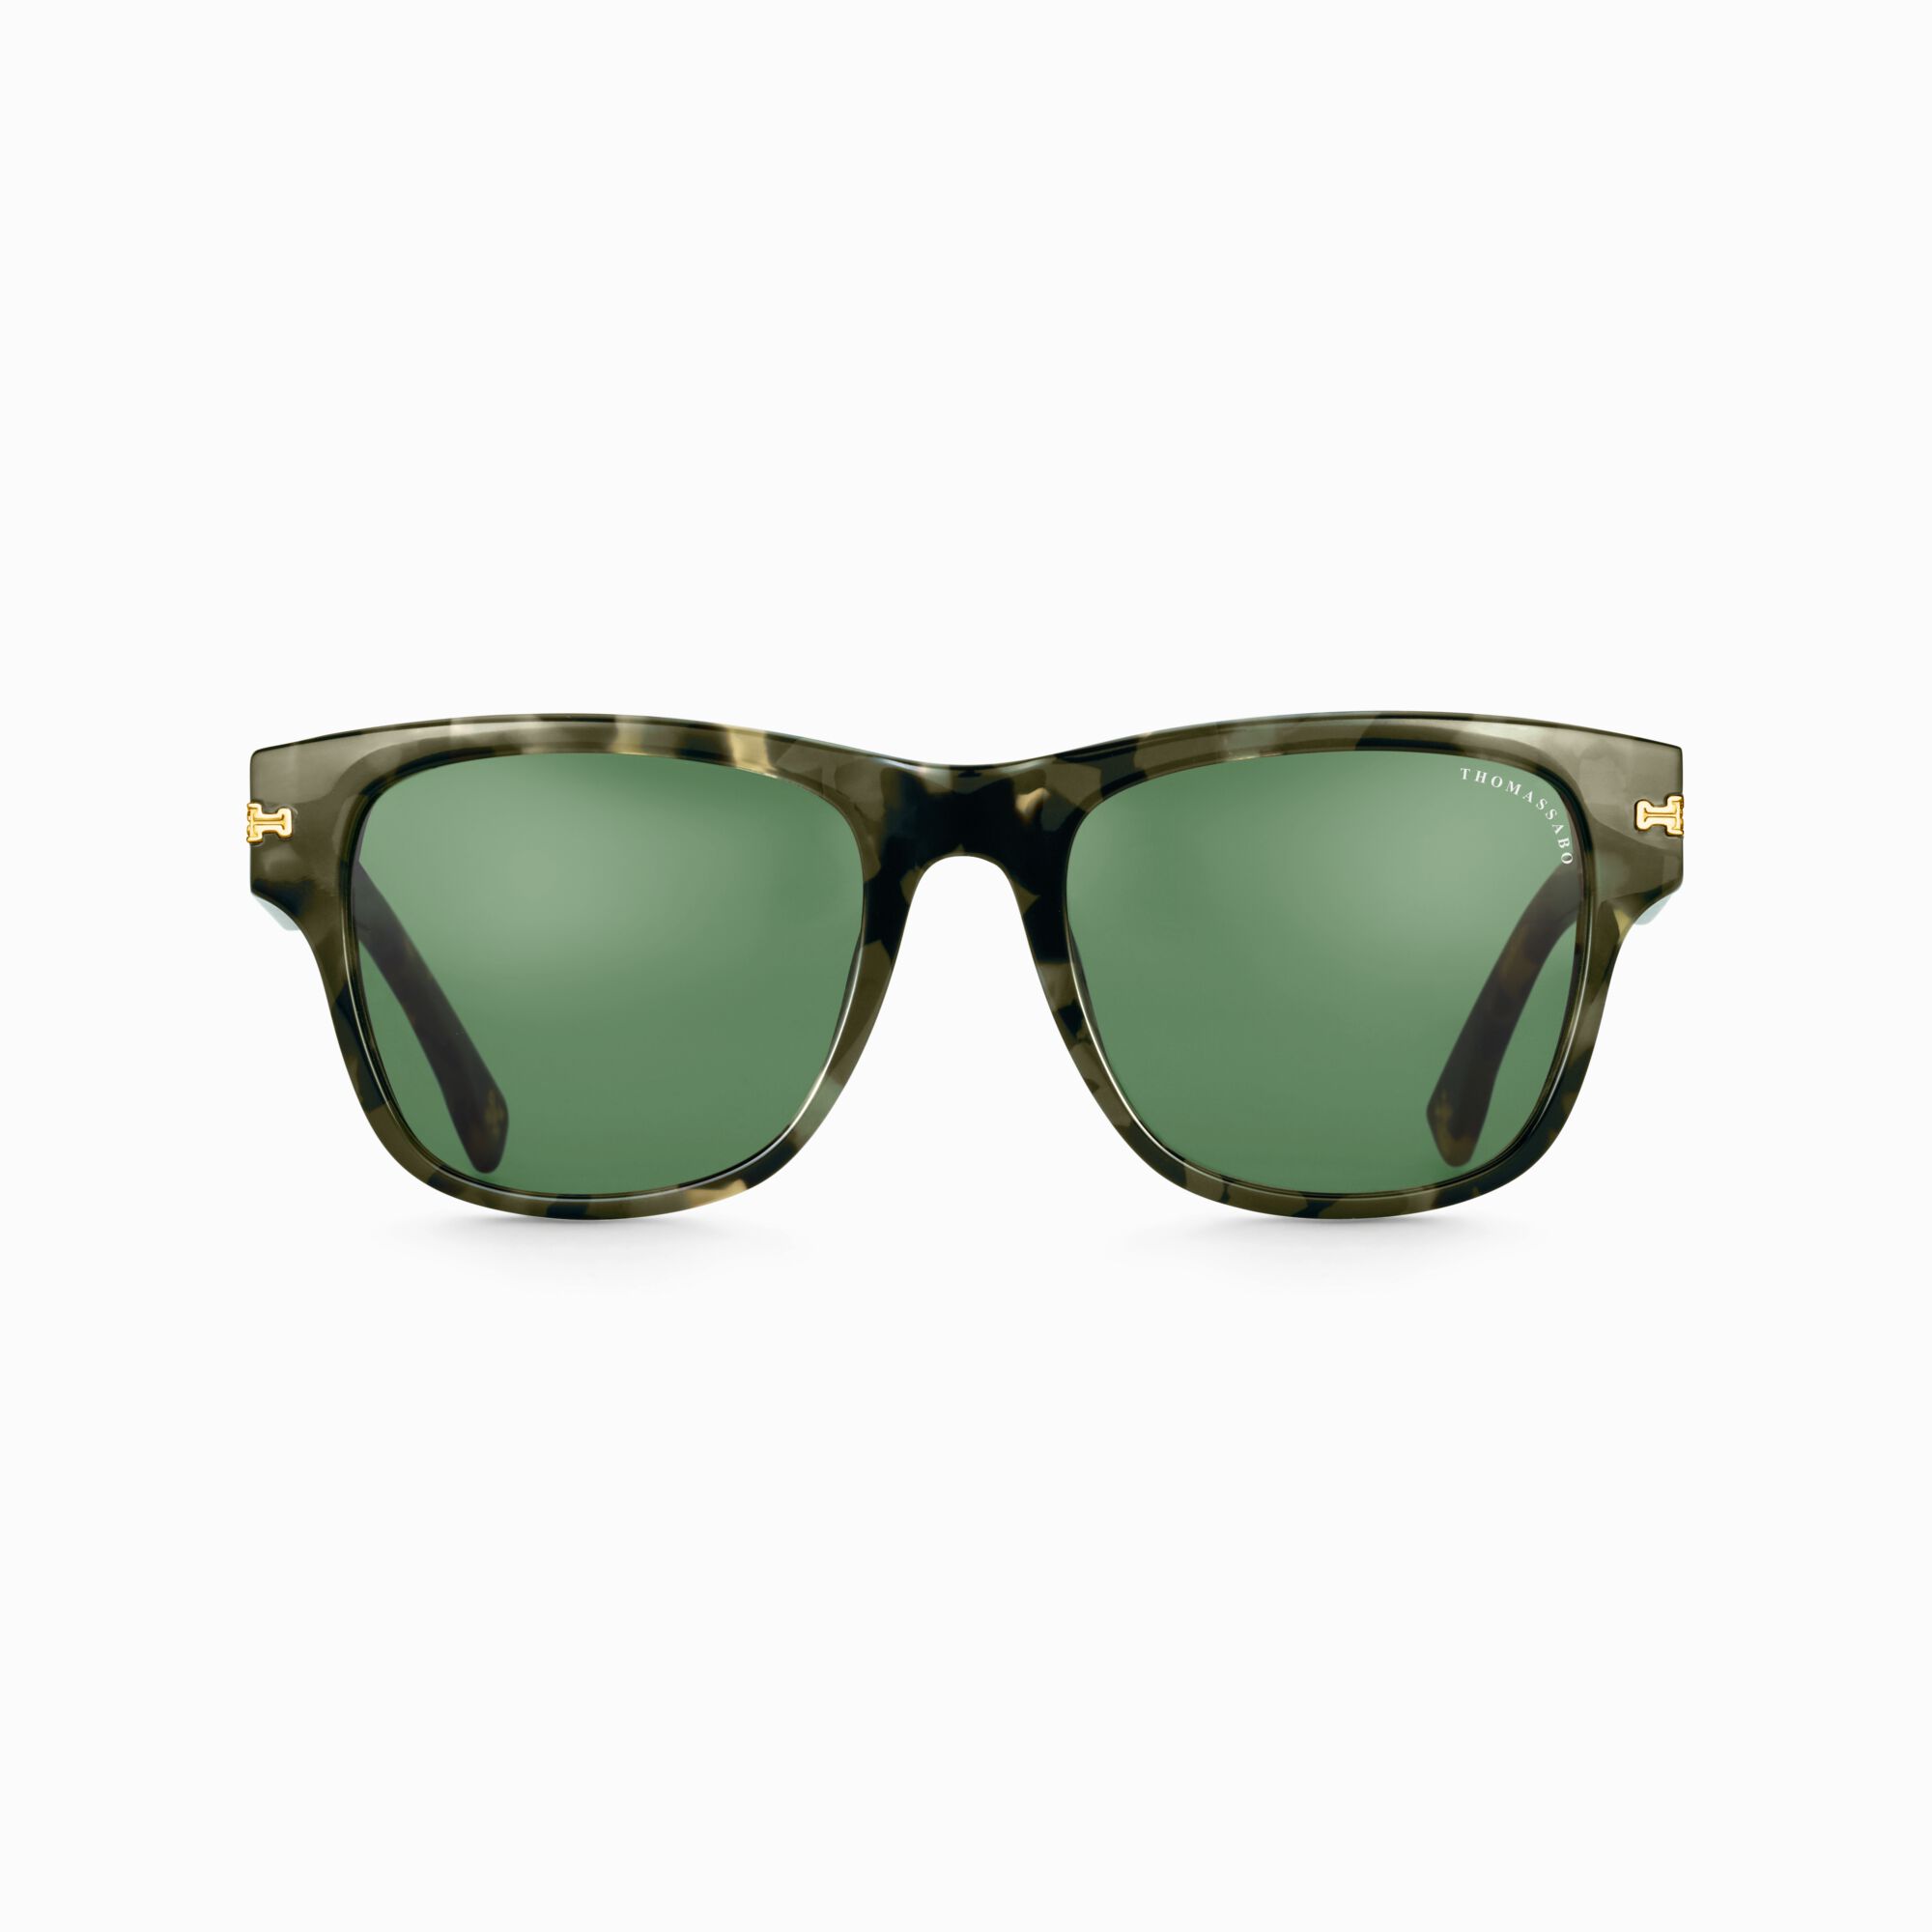 Sunglasses Jack square Havana from the  collection in the THOMAS SABO online store